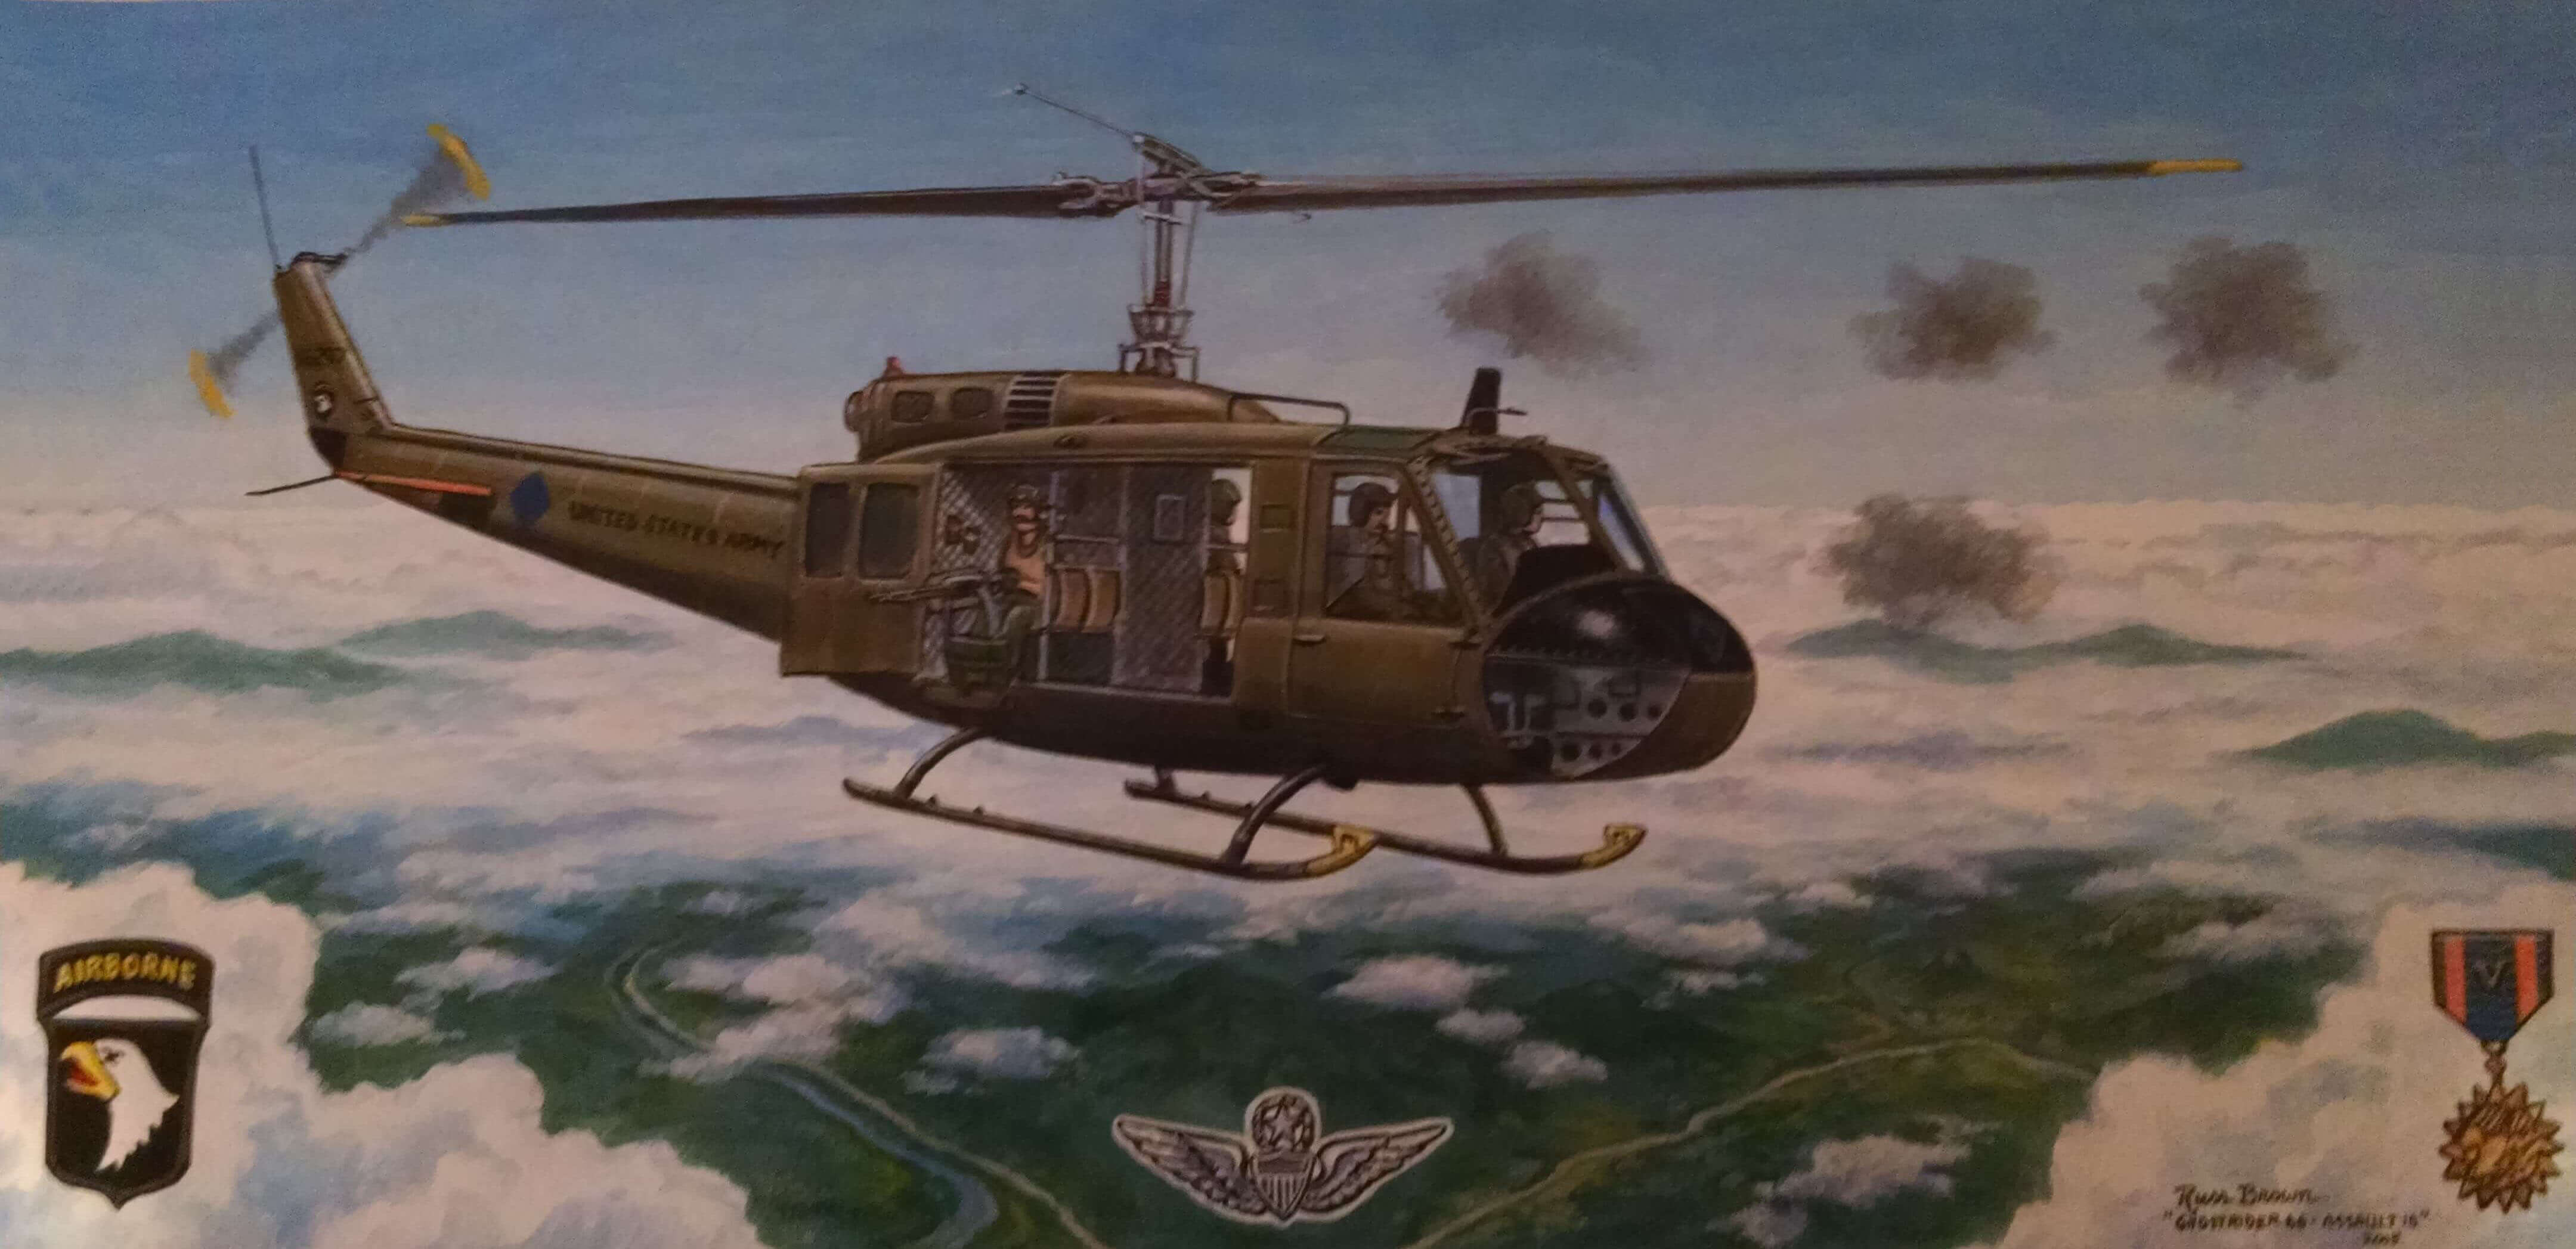 Artistic rendering of a helicopter.